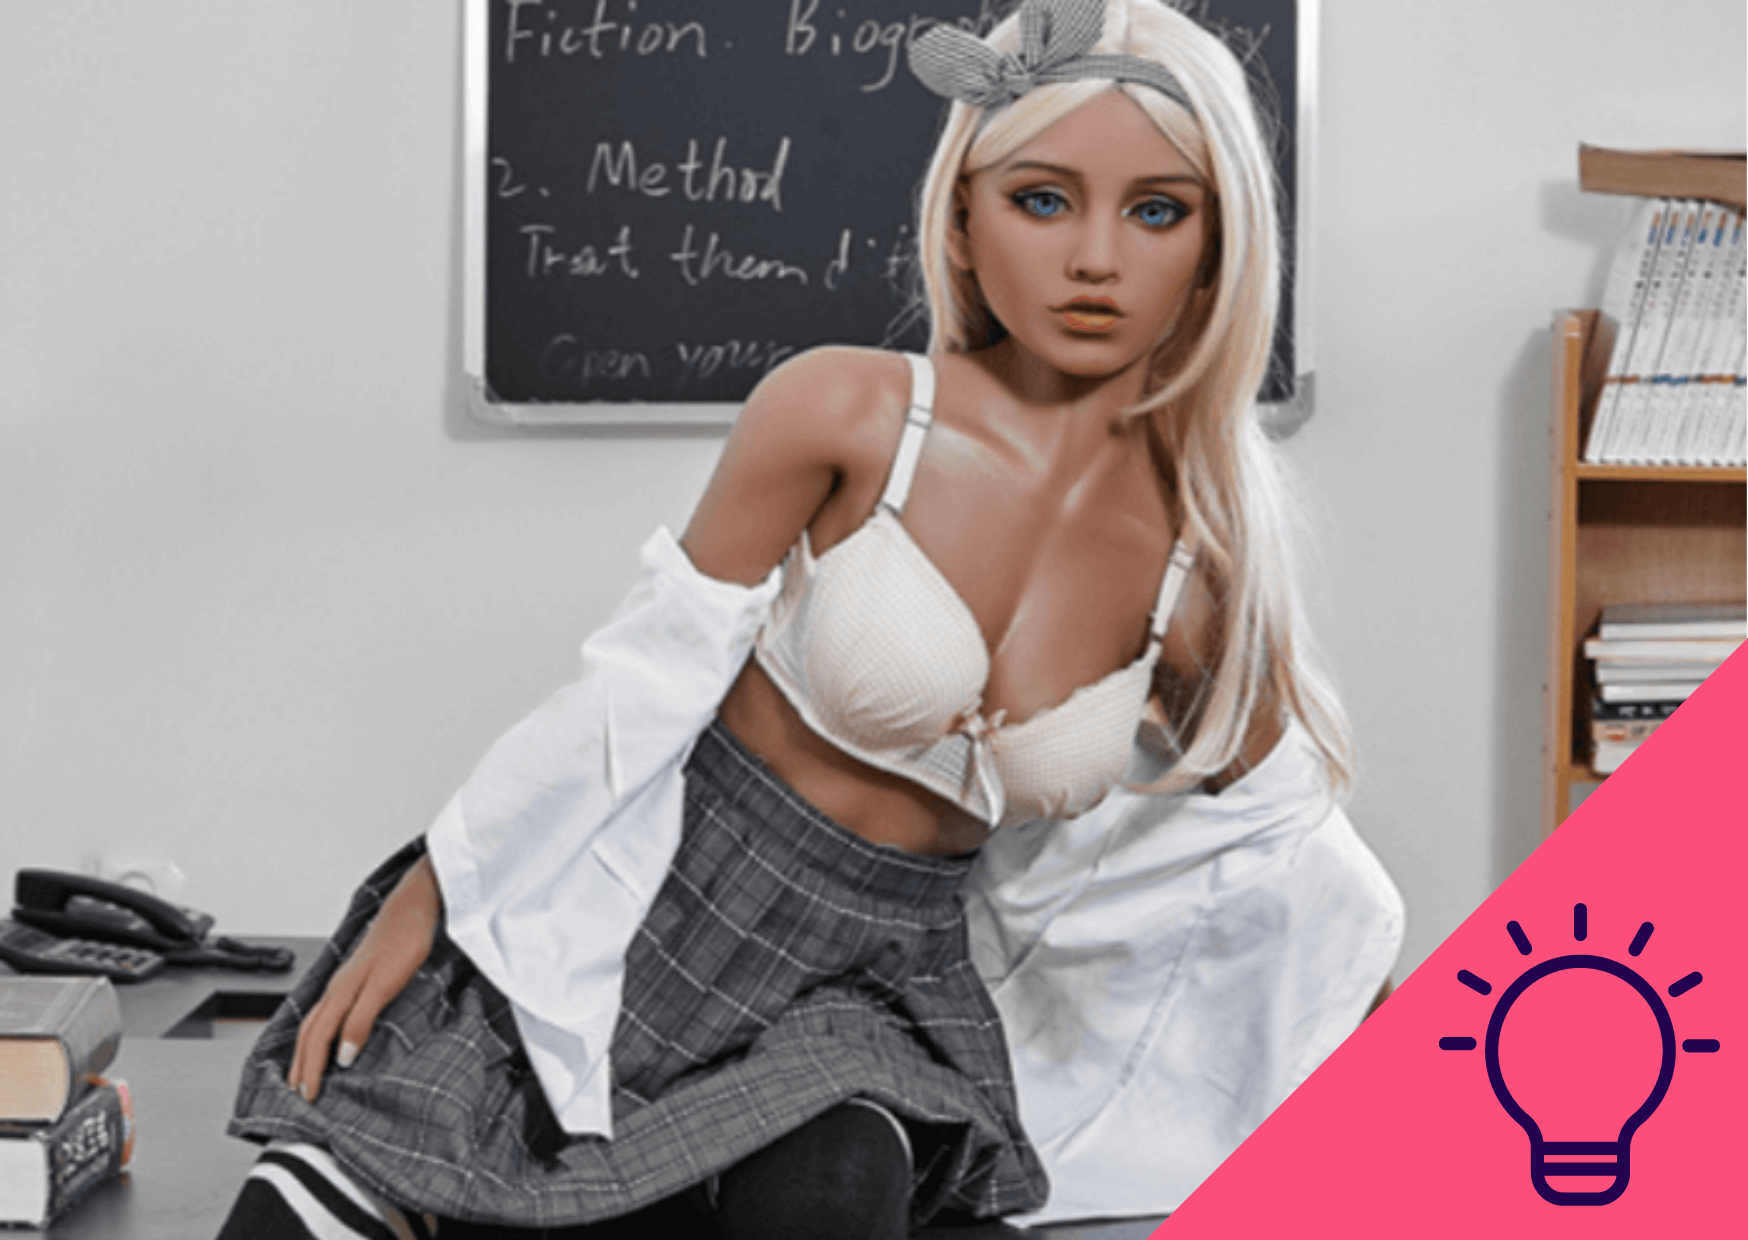 guide how to choose sex doll naughtyharbor.com